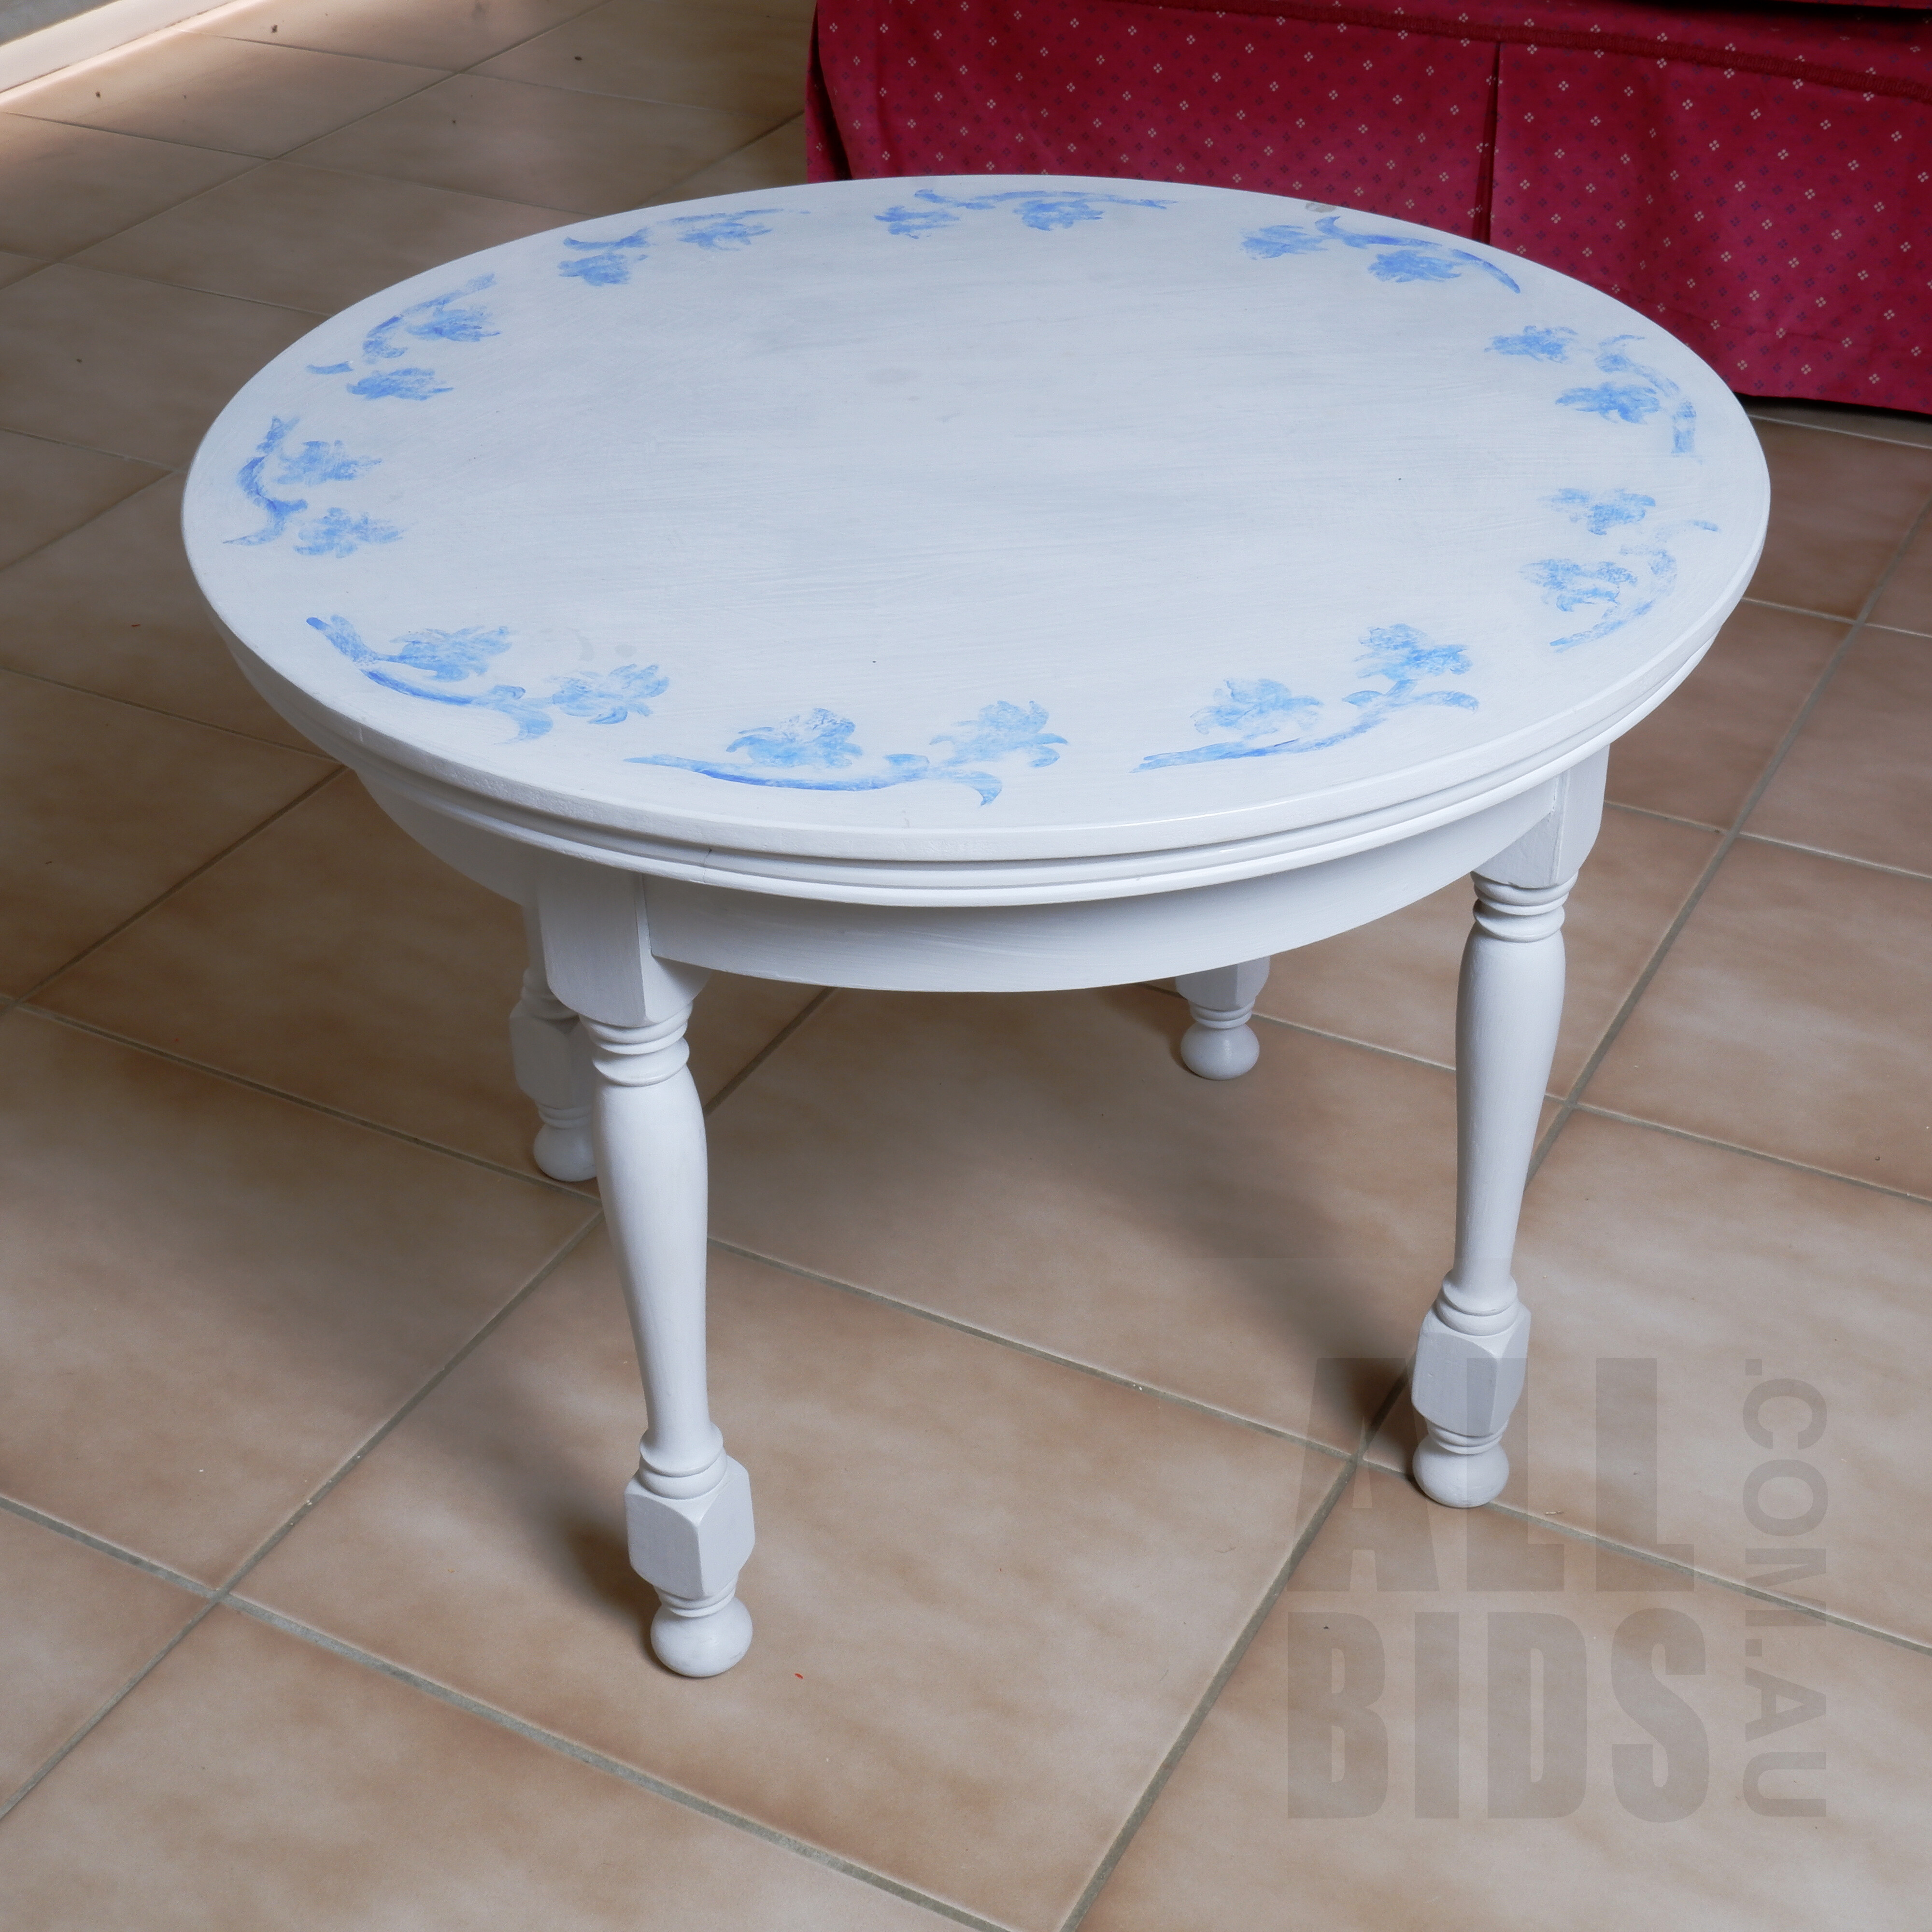 'Vintage Hand Painted Maple Coffee Table'